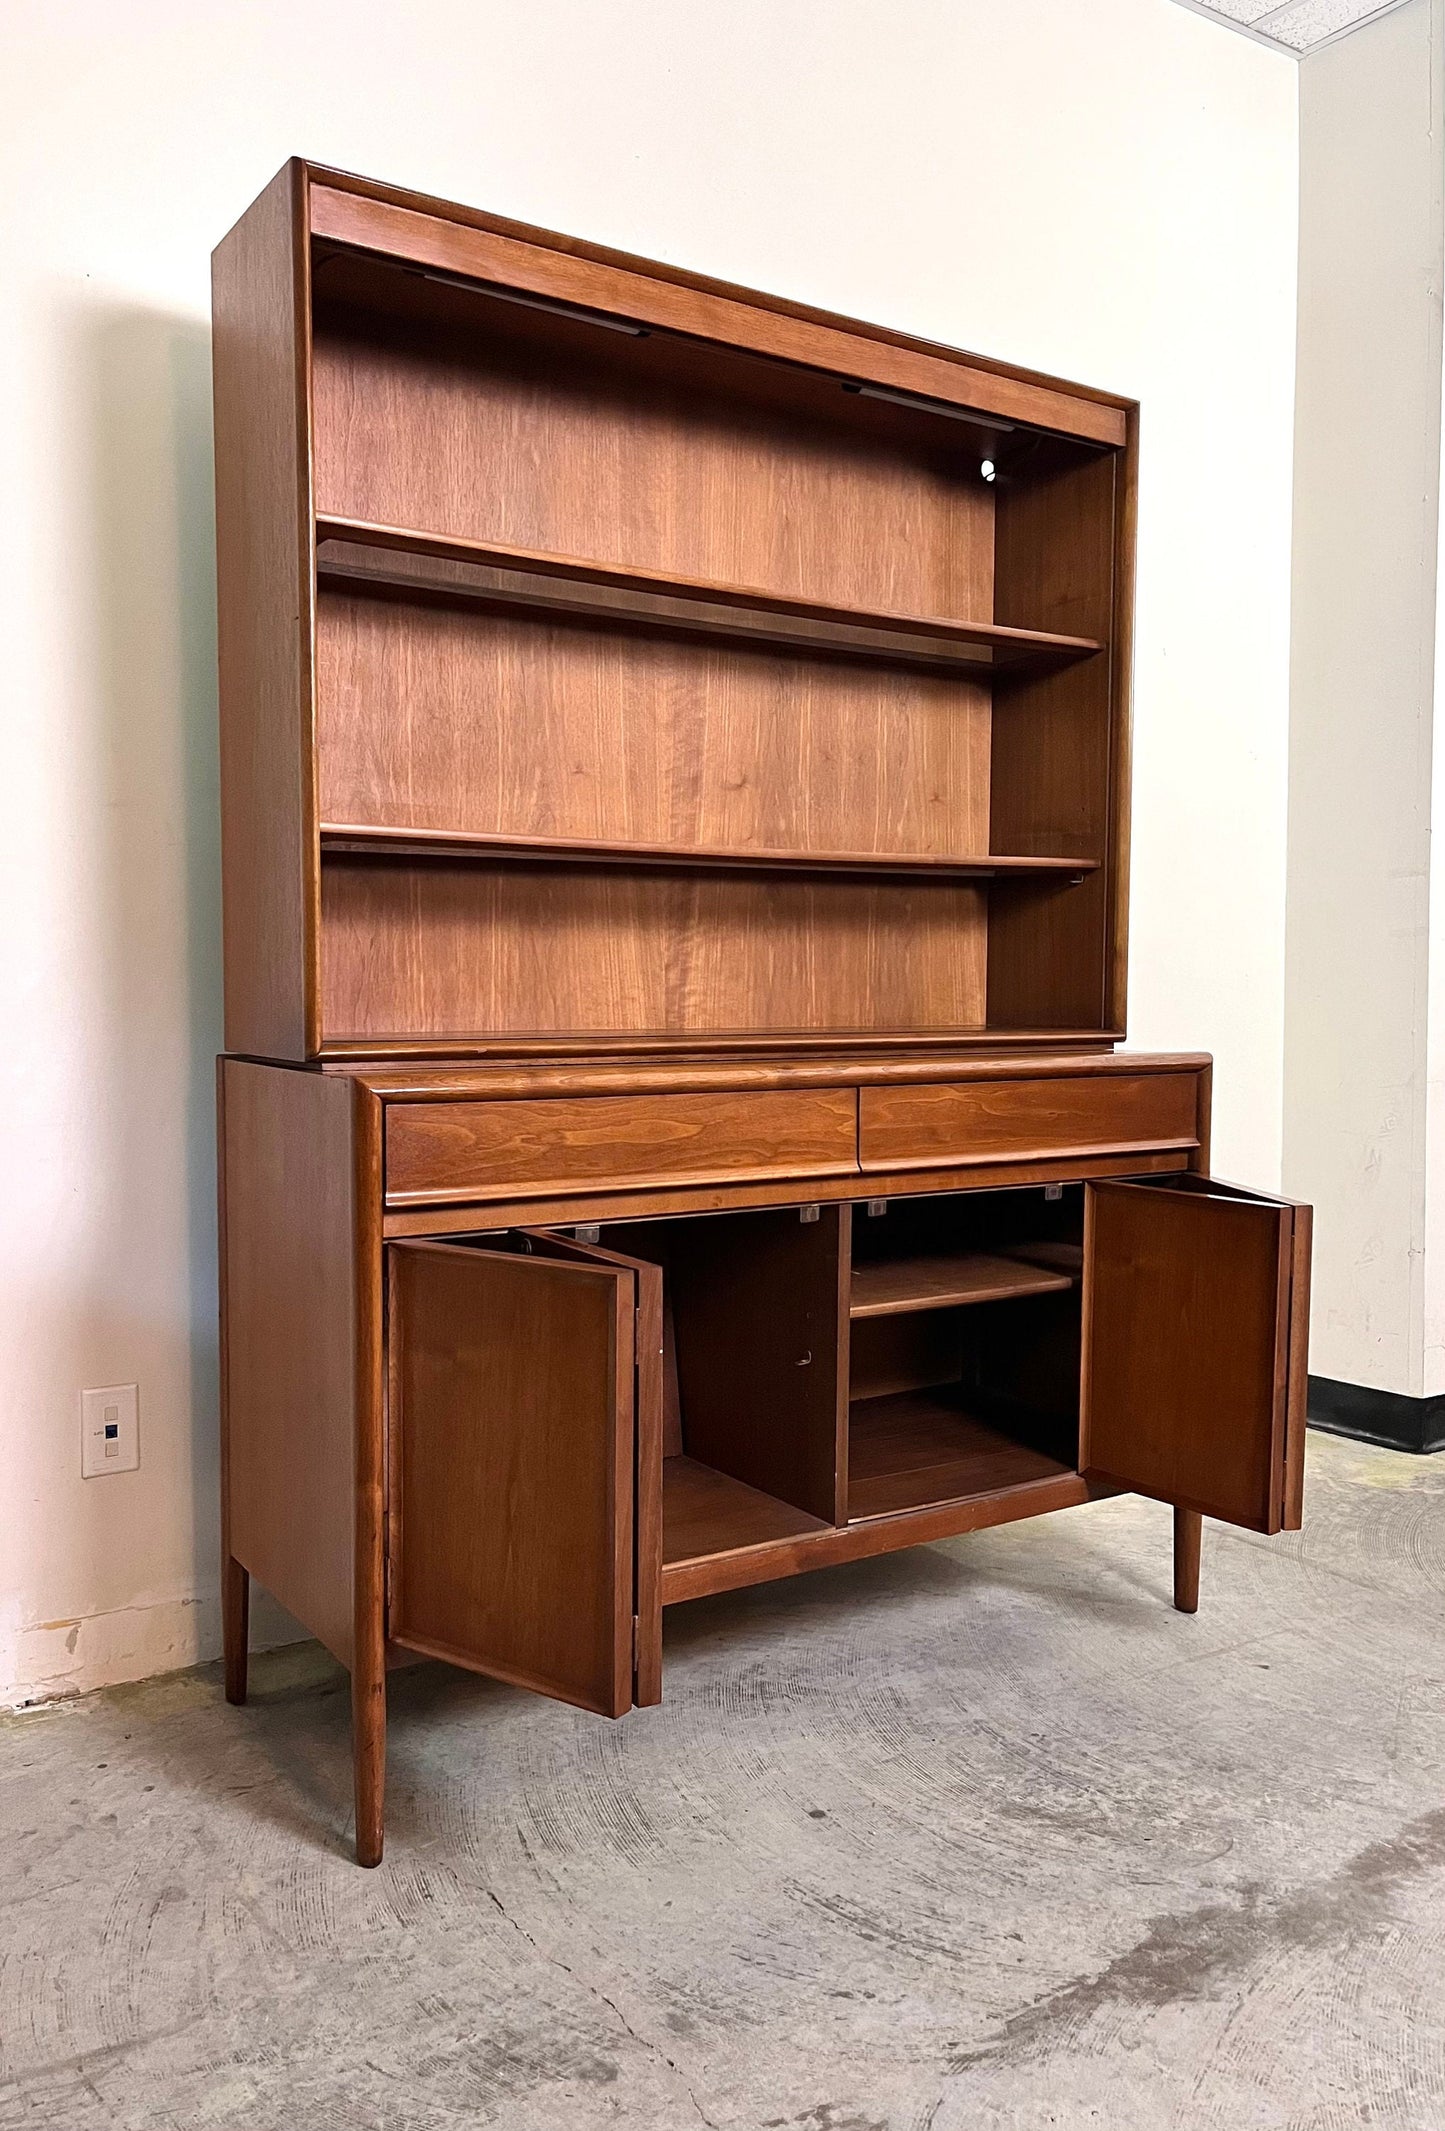 Barney Flagg for Drexel Parallel Mid Century Modern Credenza Sideboard Buffet and Hutch c. 1960s